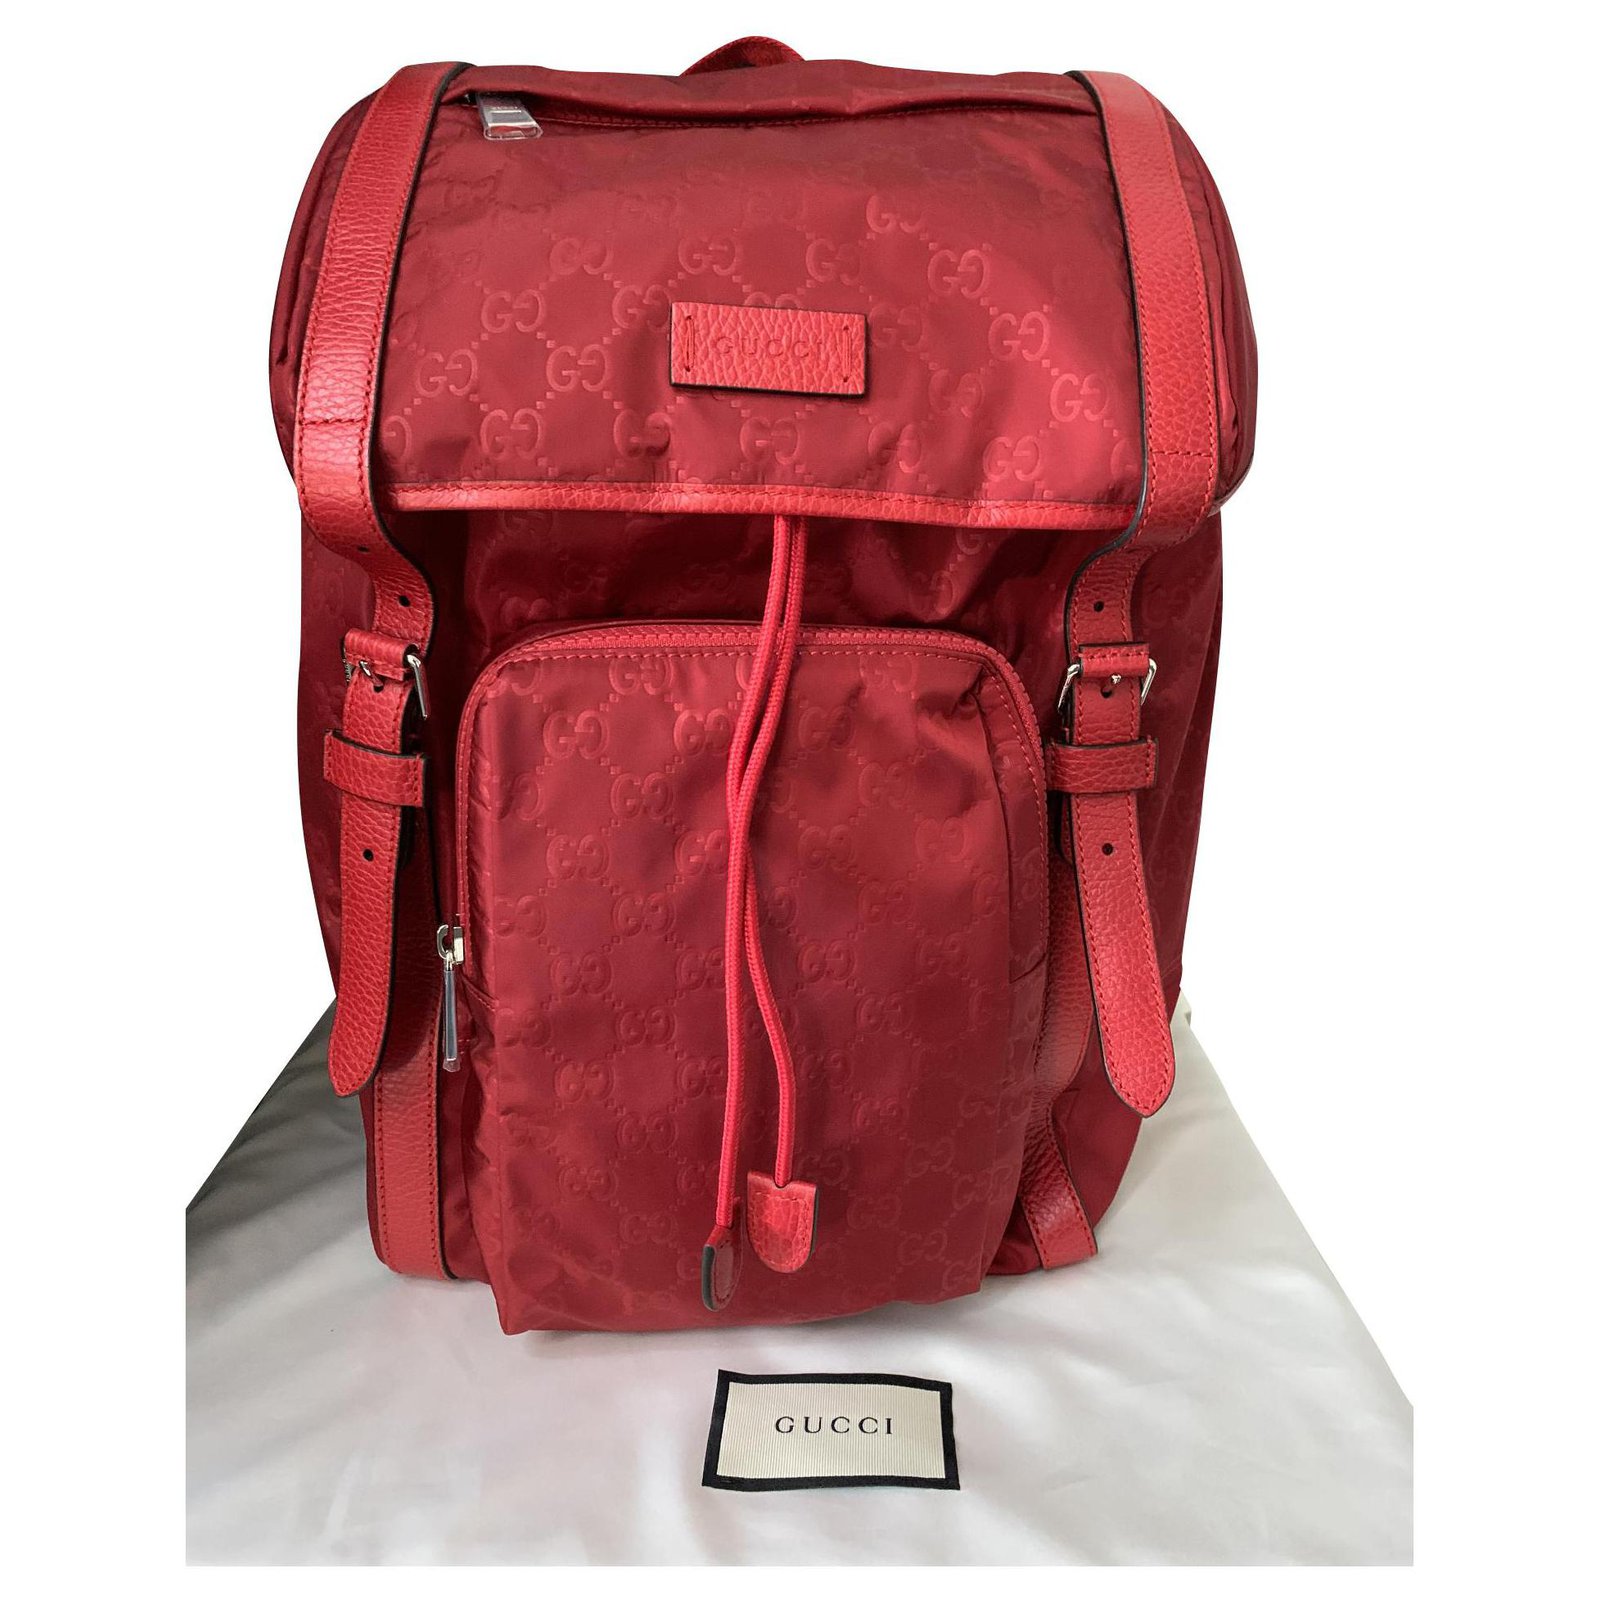 GUCCI Children's GG Supreme Wool Backpack Red 406398 - 10% OFF